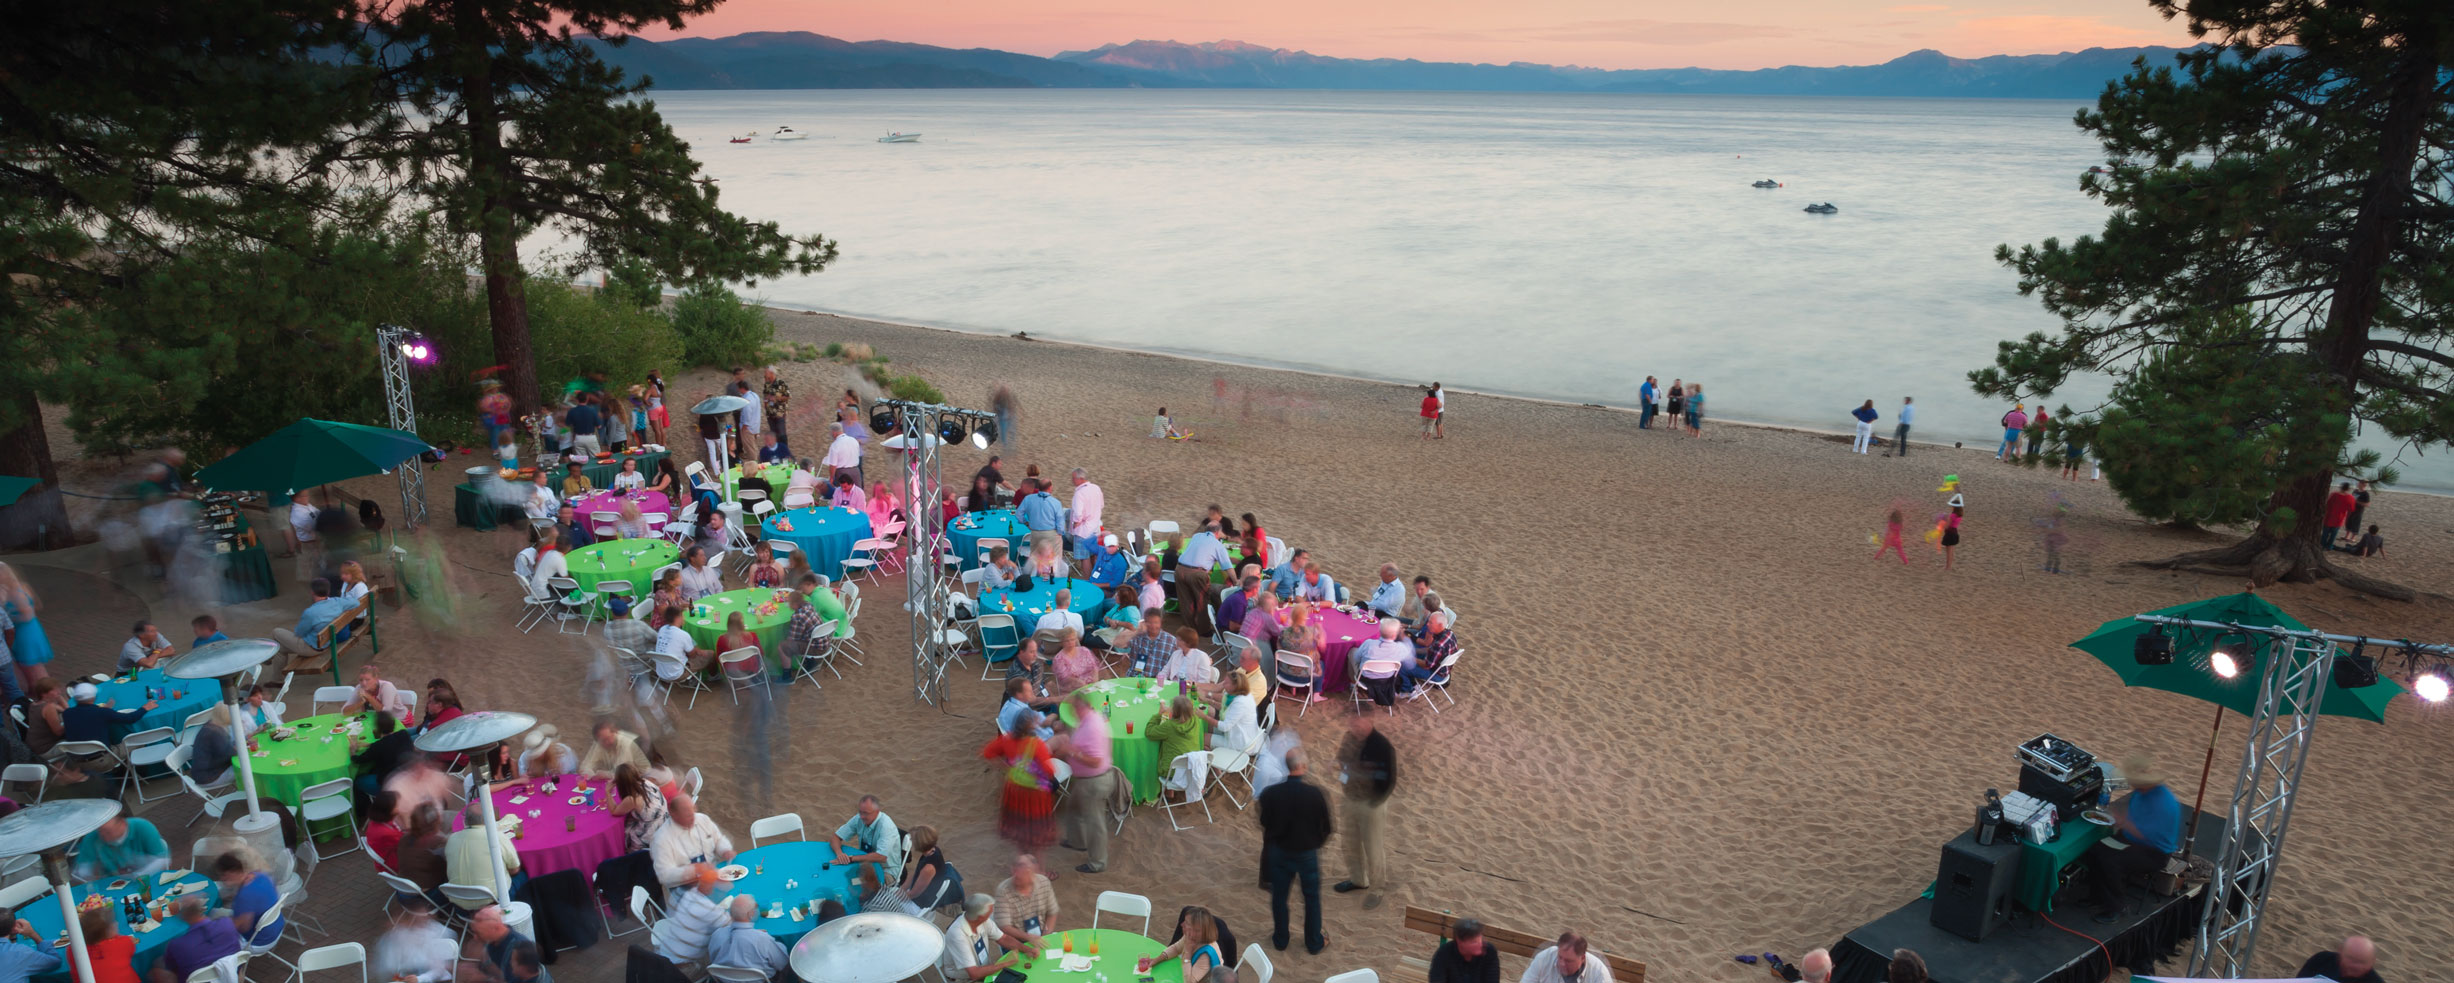 Outdoor event at North Tahoe Event Center, Lake Tahoe Conference Center and Meeting Space